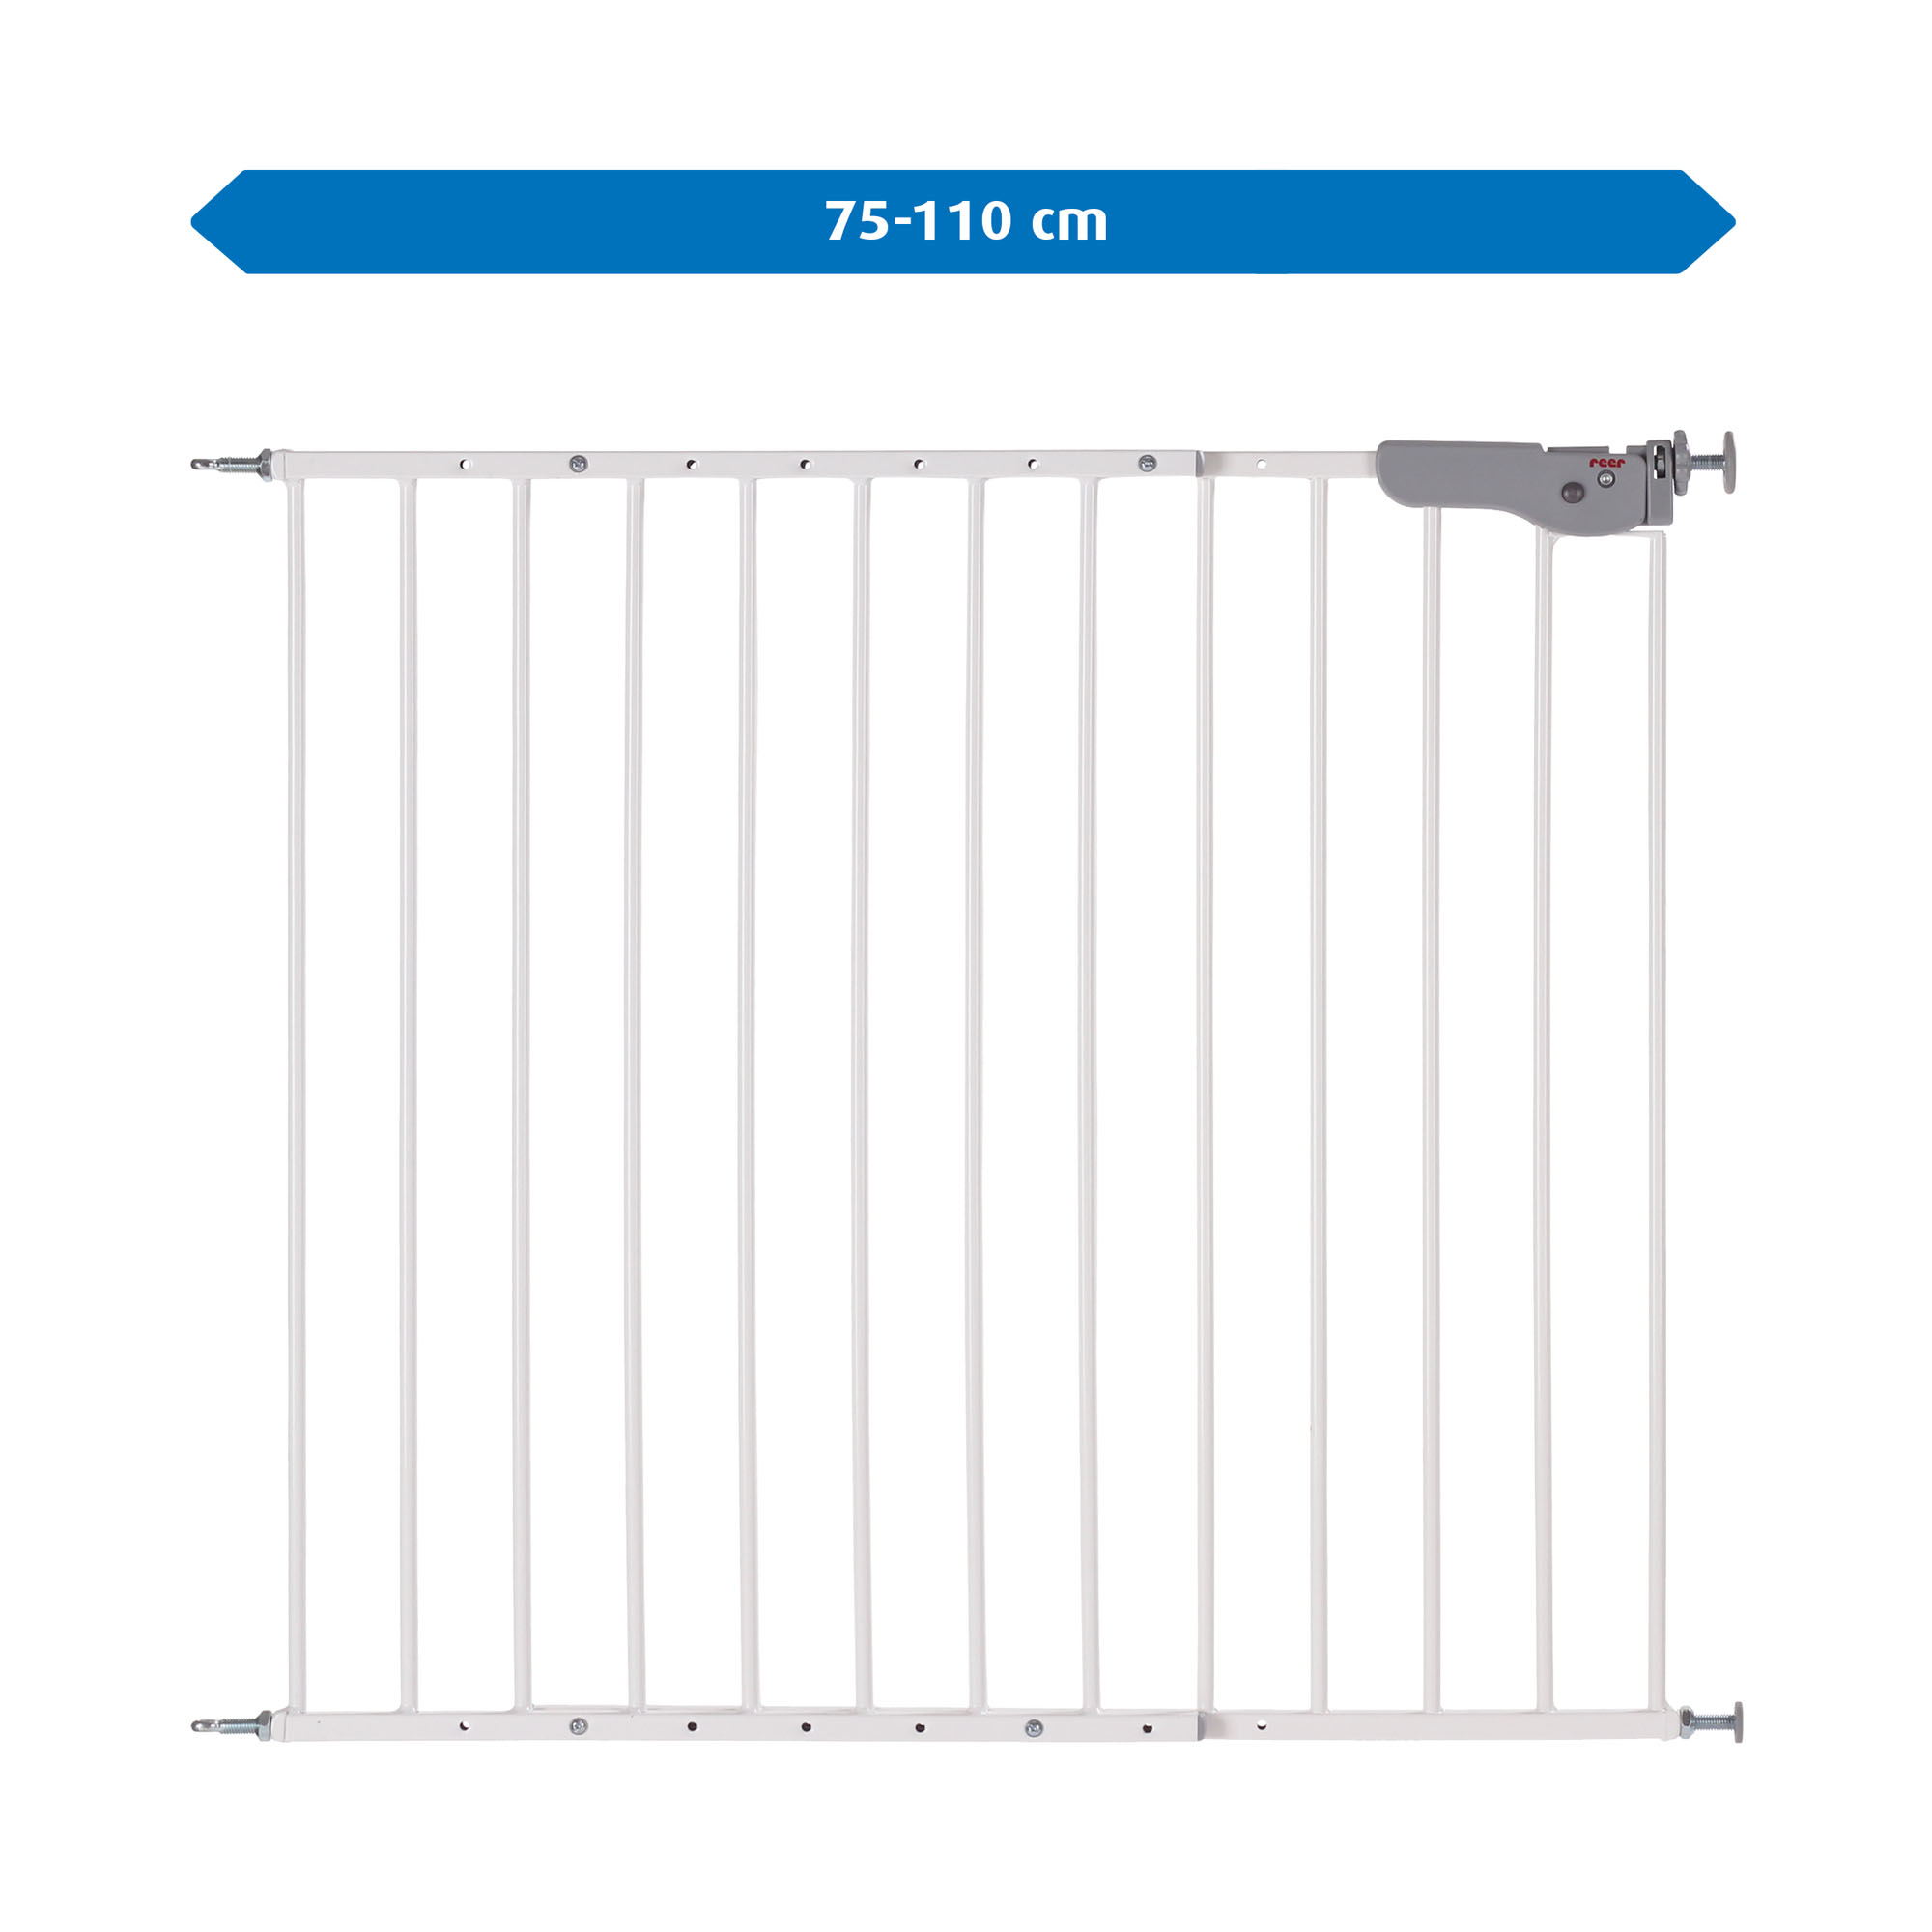 Advanced Wall-mounted gate, for gateway widths from 75 to 110 cm